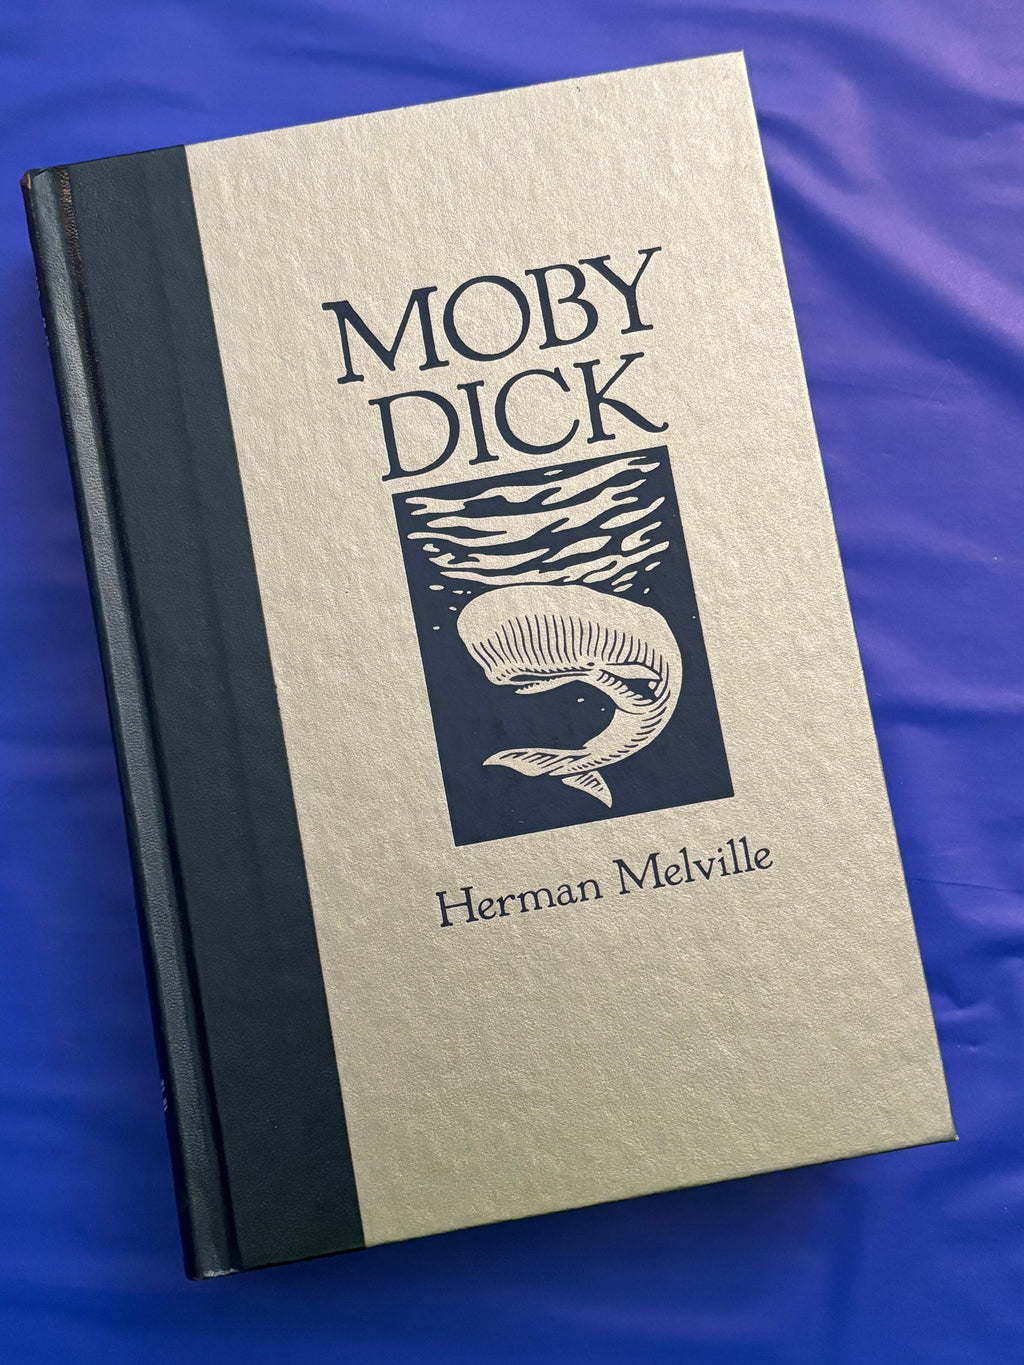 Moby Dick- By Herman Melville (Readers Digest Edition)